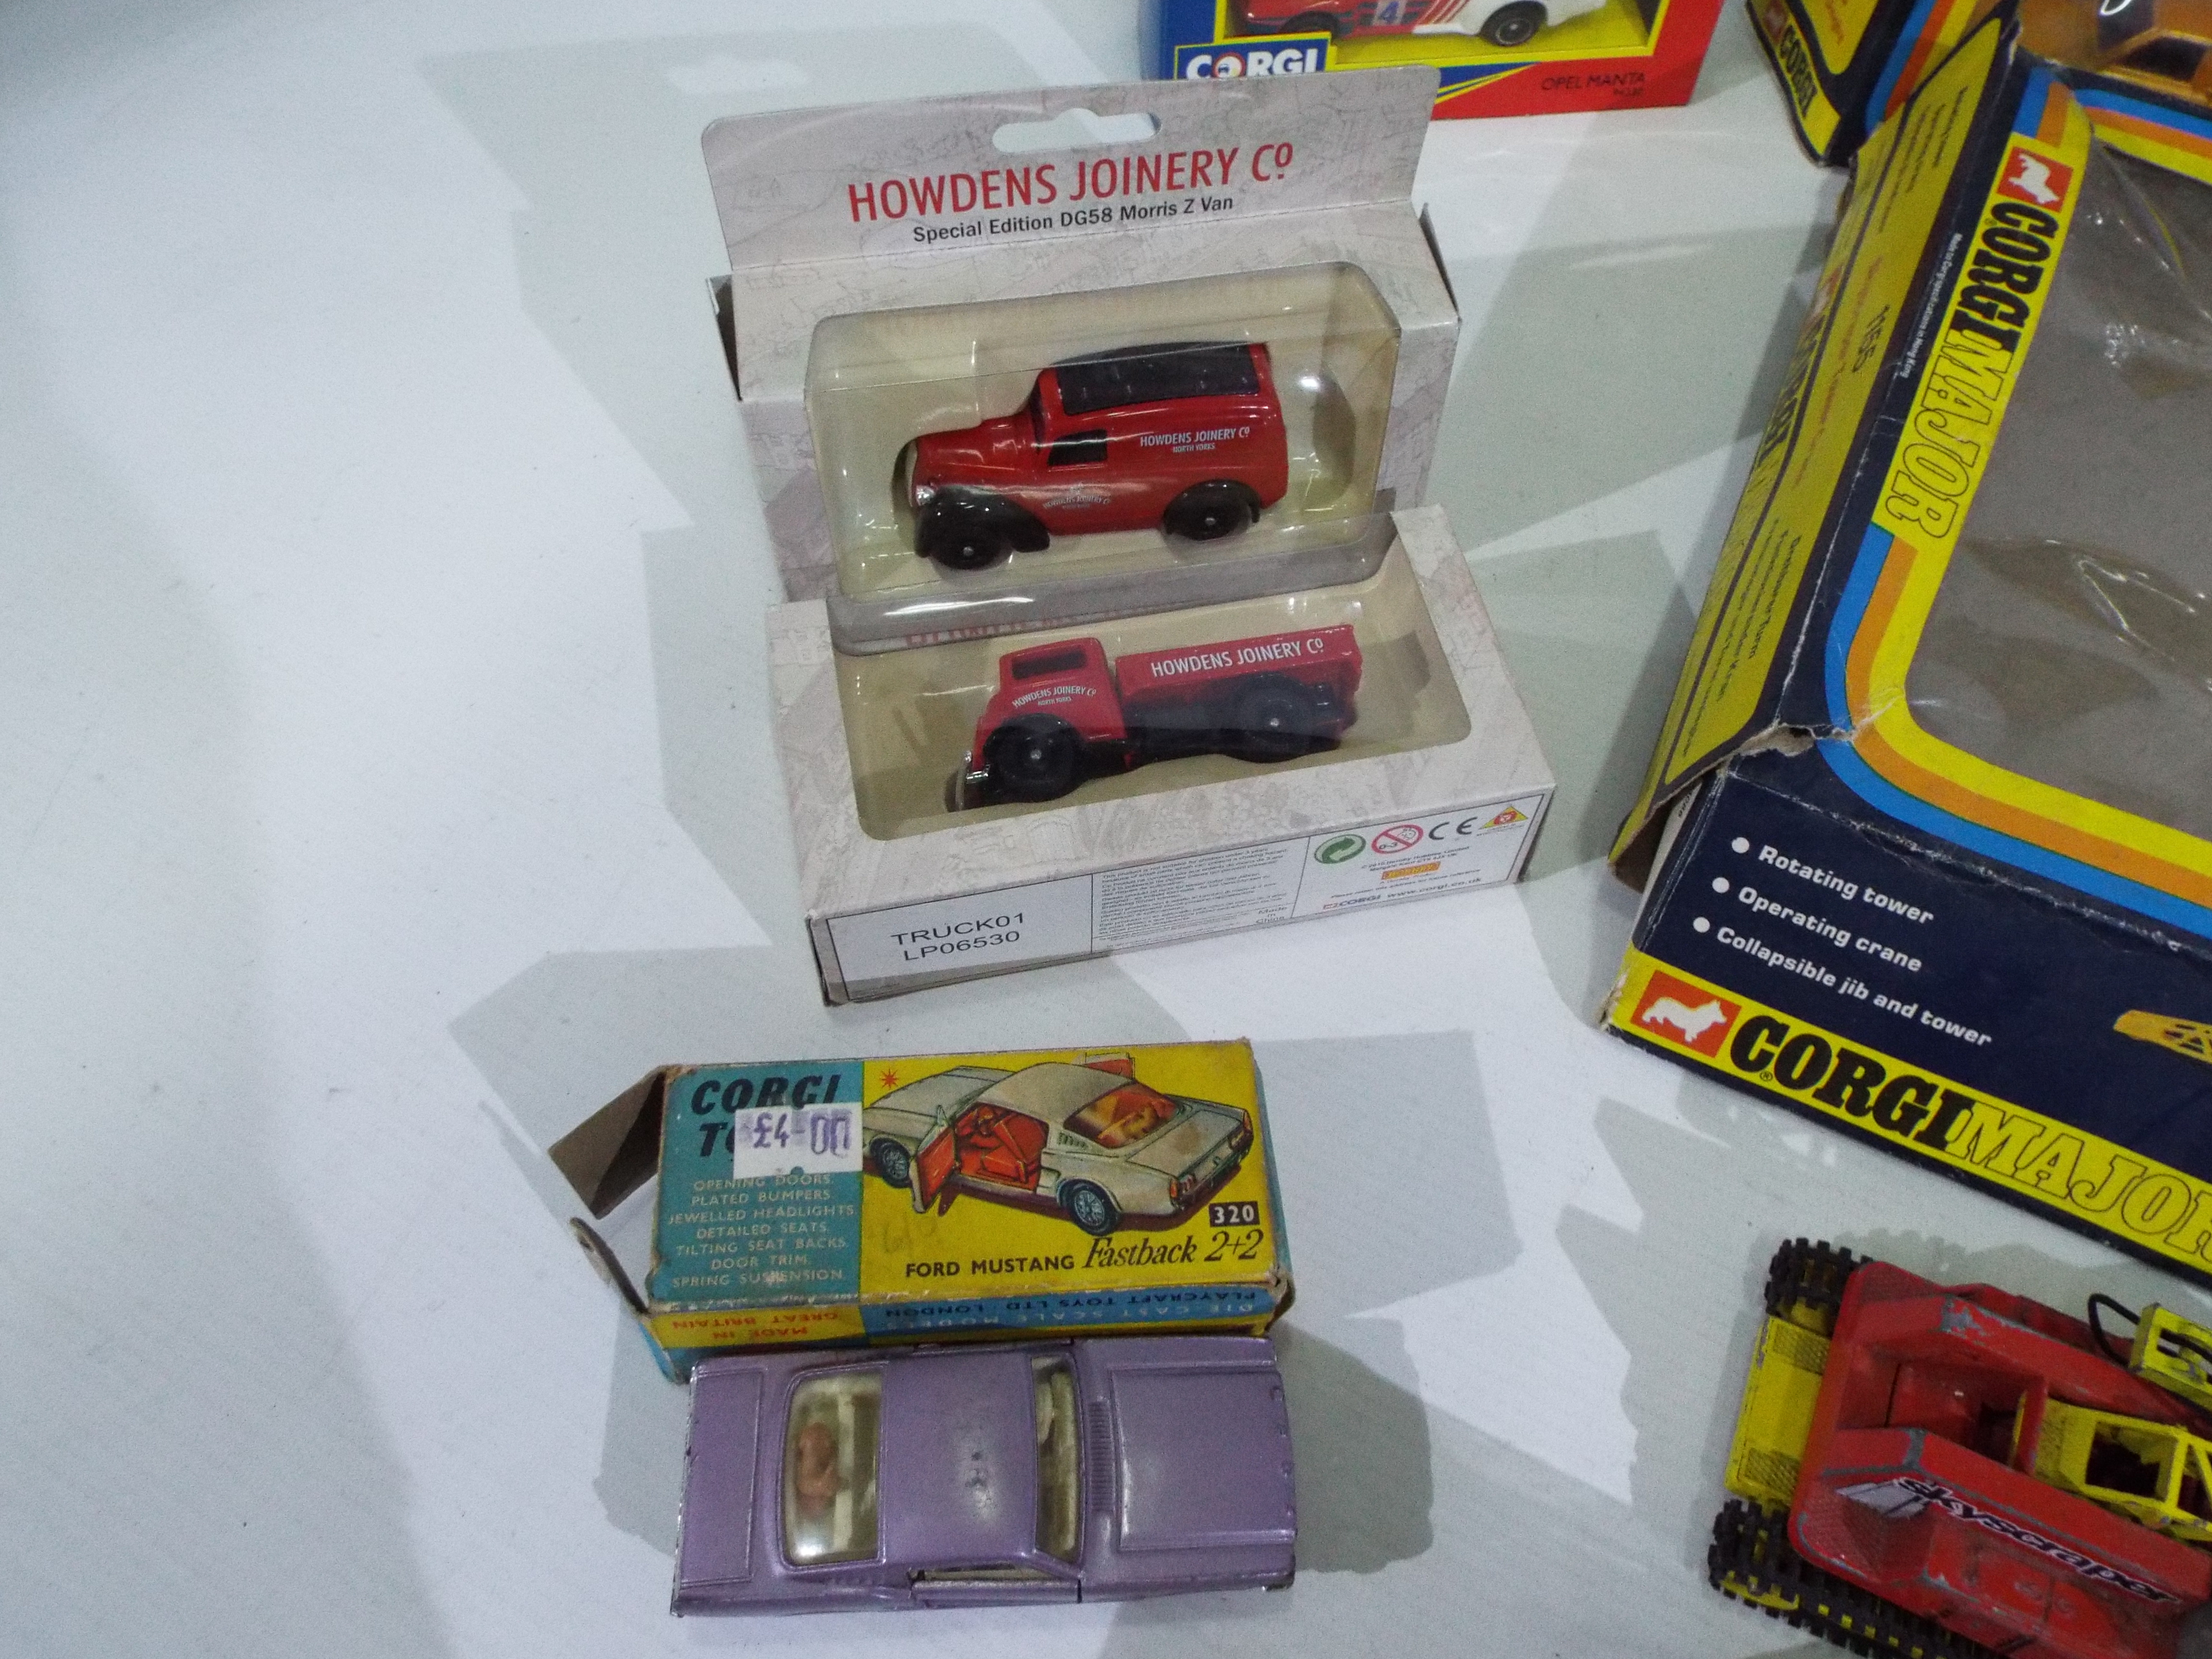 Corgi - 16 x boxed die-cast Corgi vehicles - Lot includes a 320 Ford Mustang, - Image 3 of 7